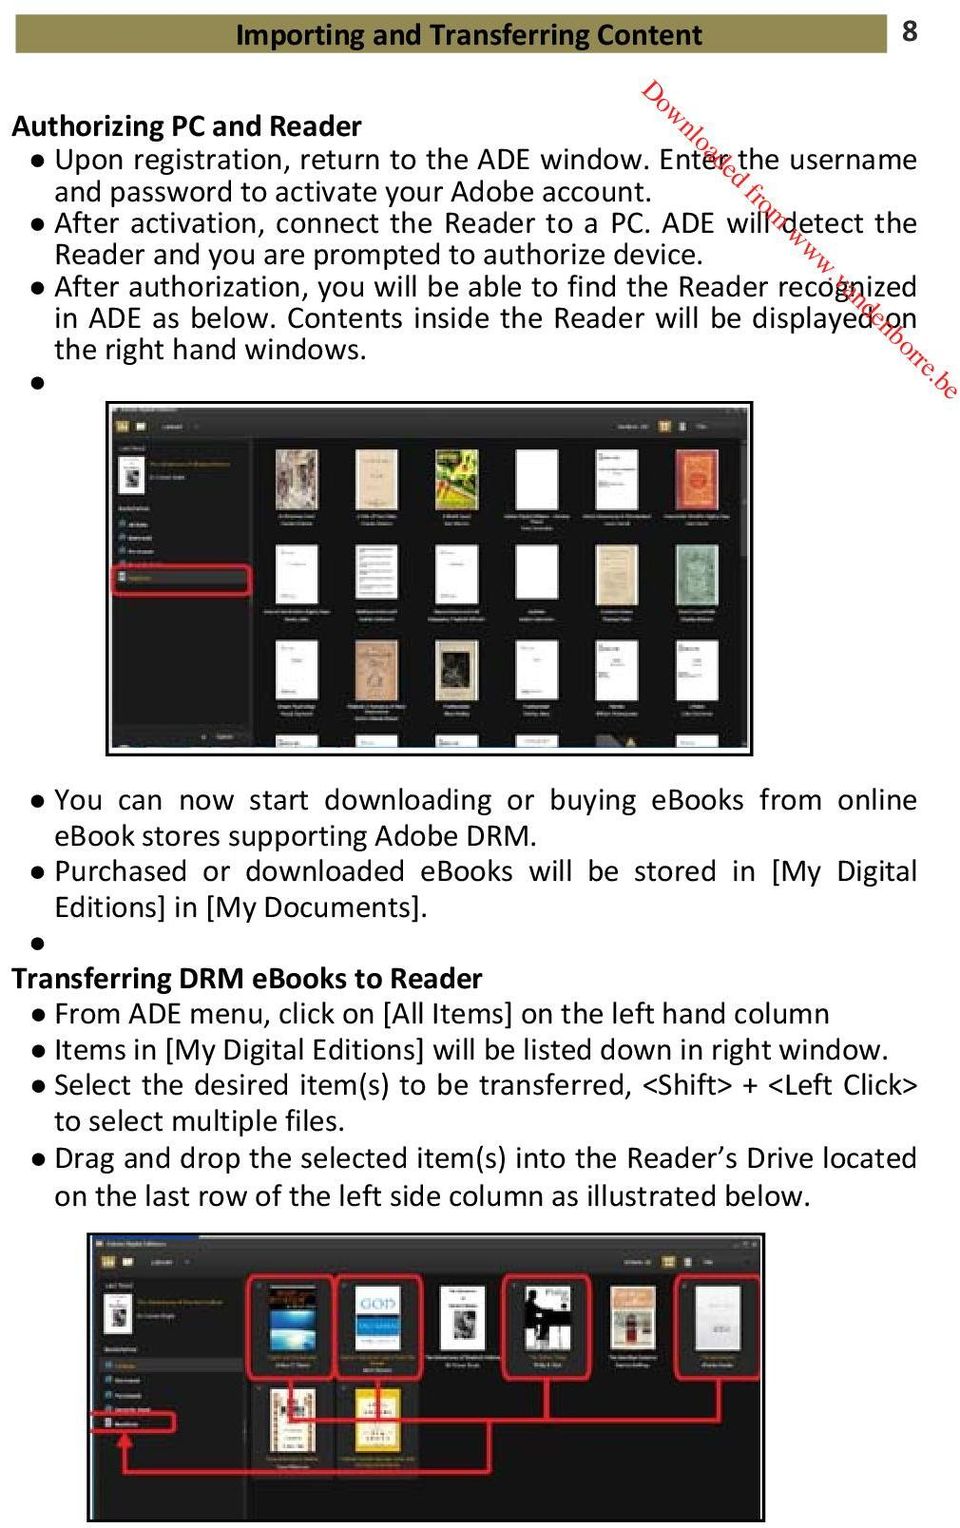 Contents inside the Reader will be displayed on the right hand windows. You can now start downloading or buying ebooks from online ebook stores supporting Adobe DRM.